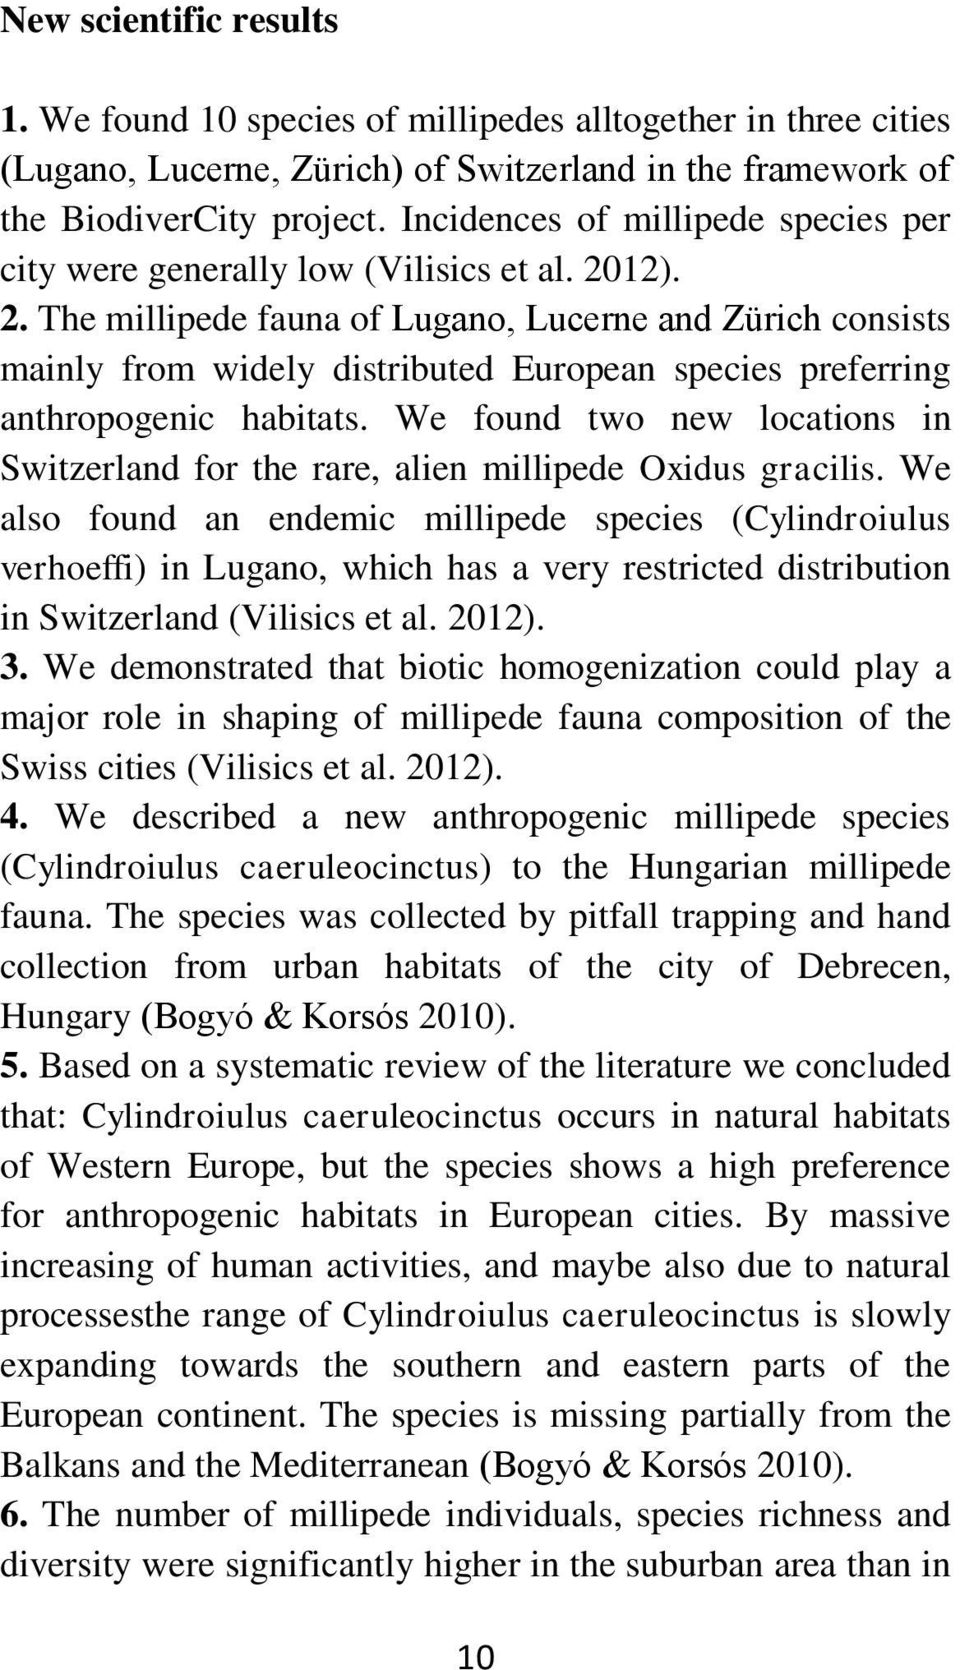 12). 2. The millipede fauna of Lugano, Lucerne and Zürich consists mainly from widely distributed European species preferring anthropogenic habitats.